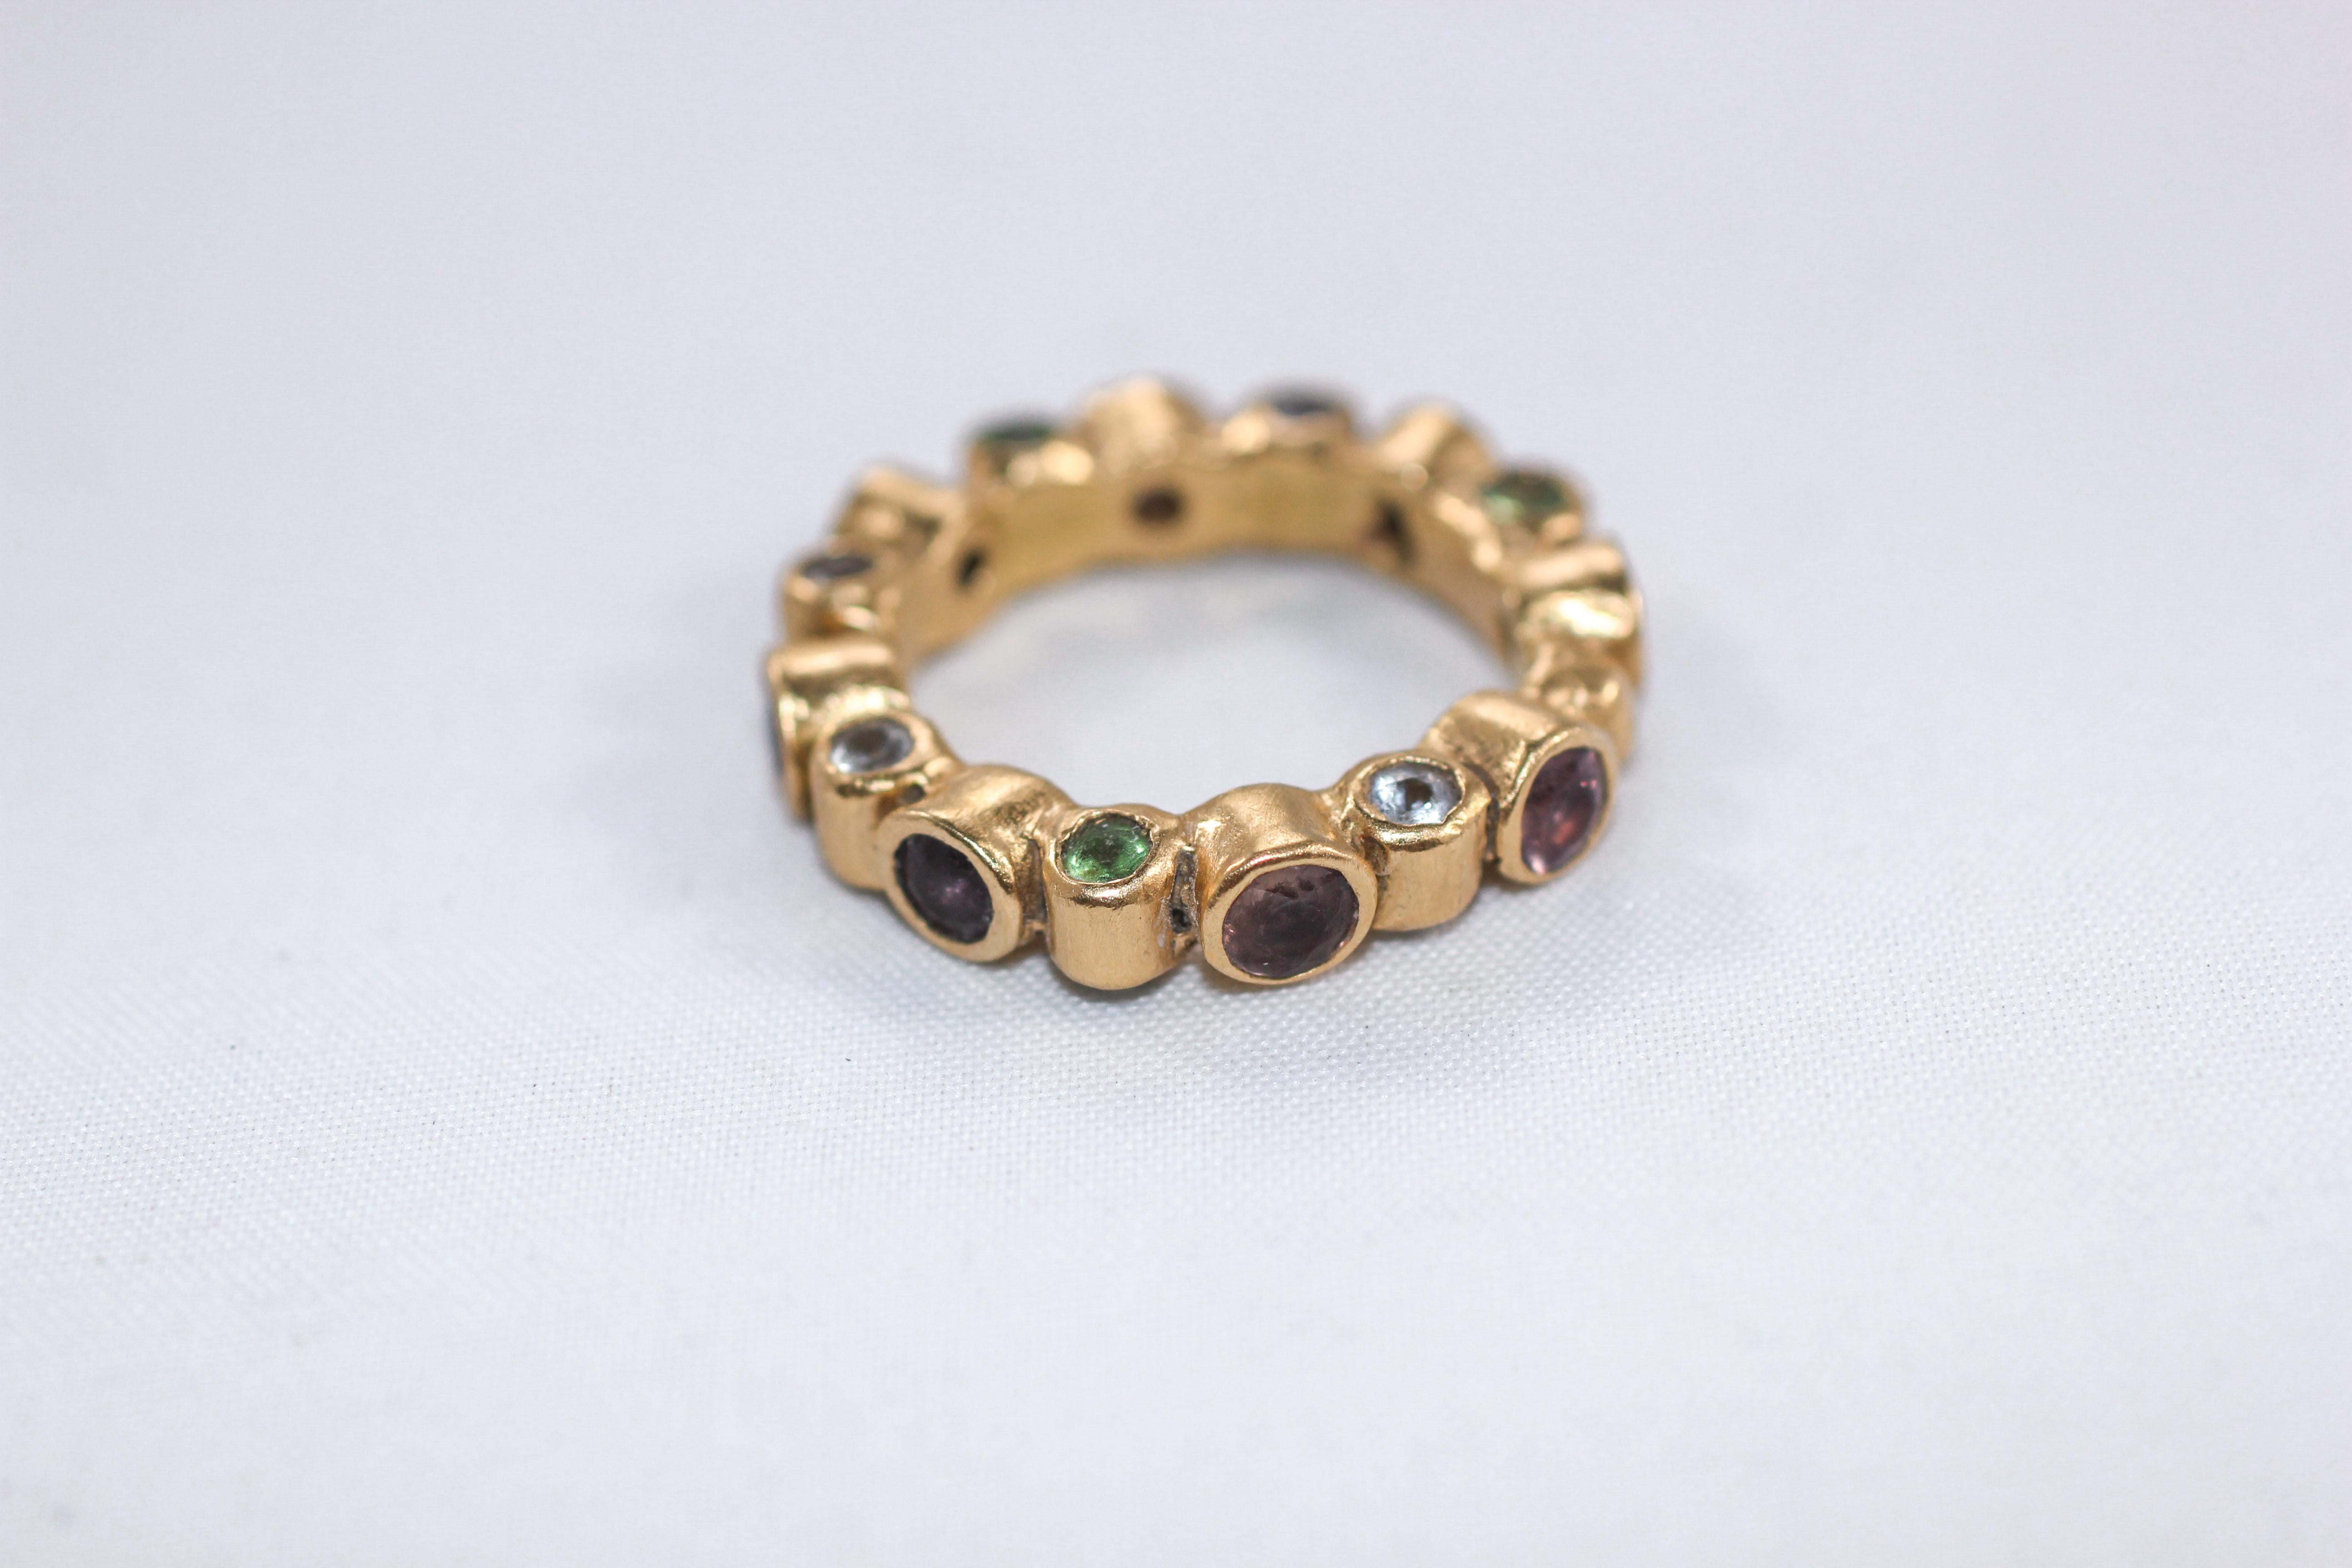 Cylinder Ring. An unusual bezel bridal band or a fashion ring, set with stones on all three sides. This listing is for the ring set with pink and white sapphires, tanzanites, and tsavorites, brilliant cut stones. Like a sculpture, it appears